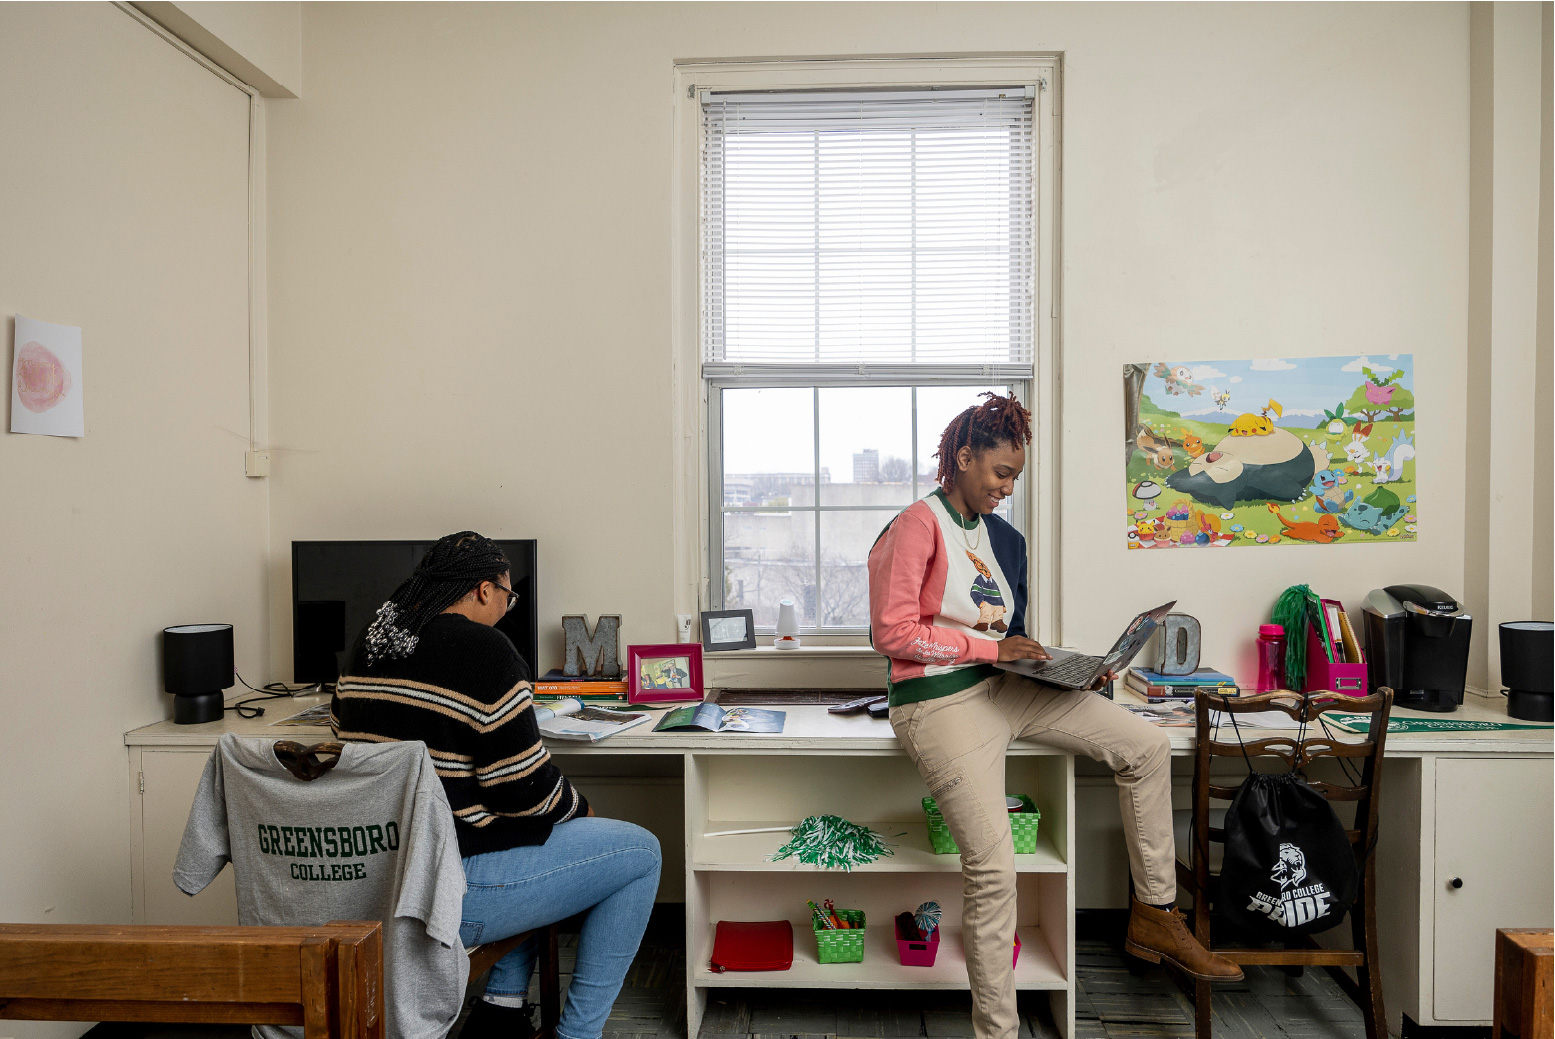 Greensboro College students studying in dorm room